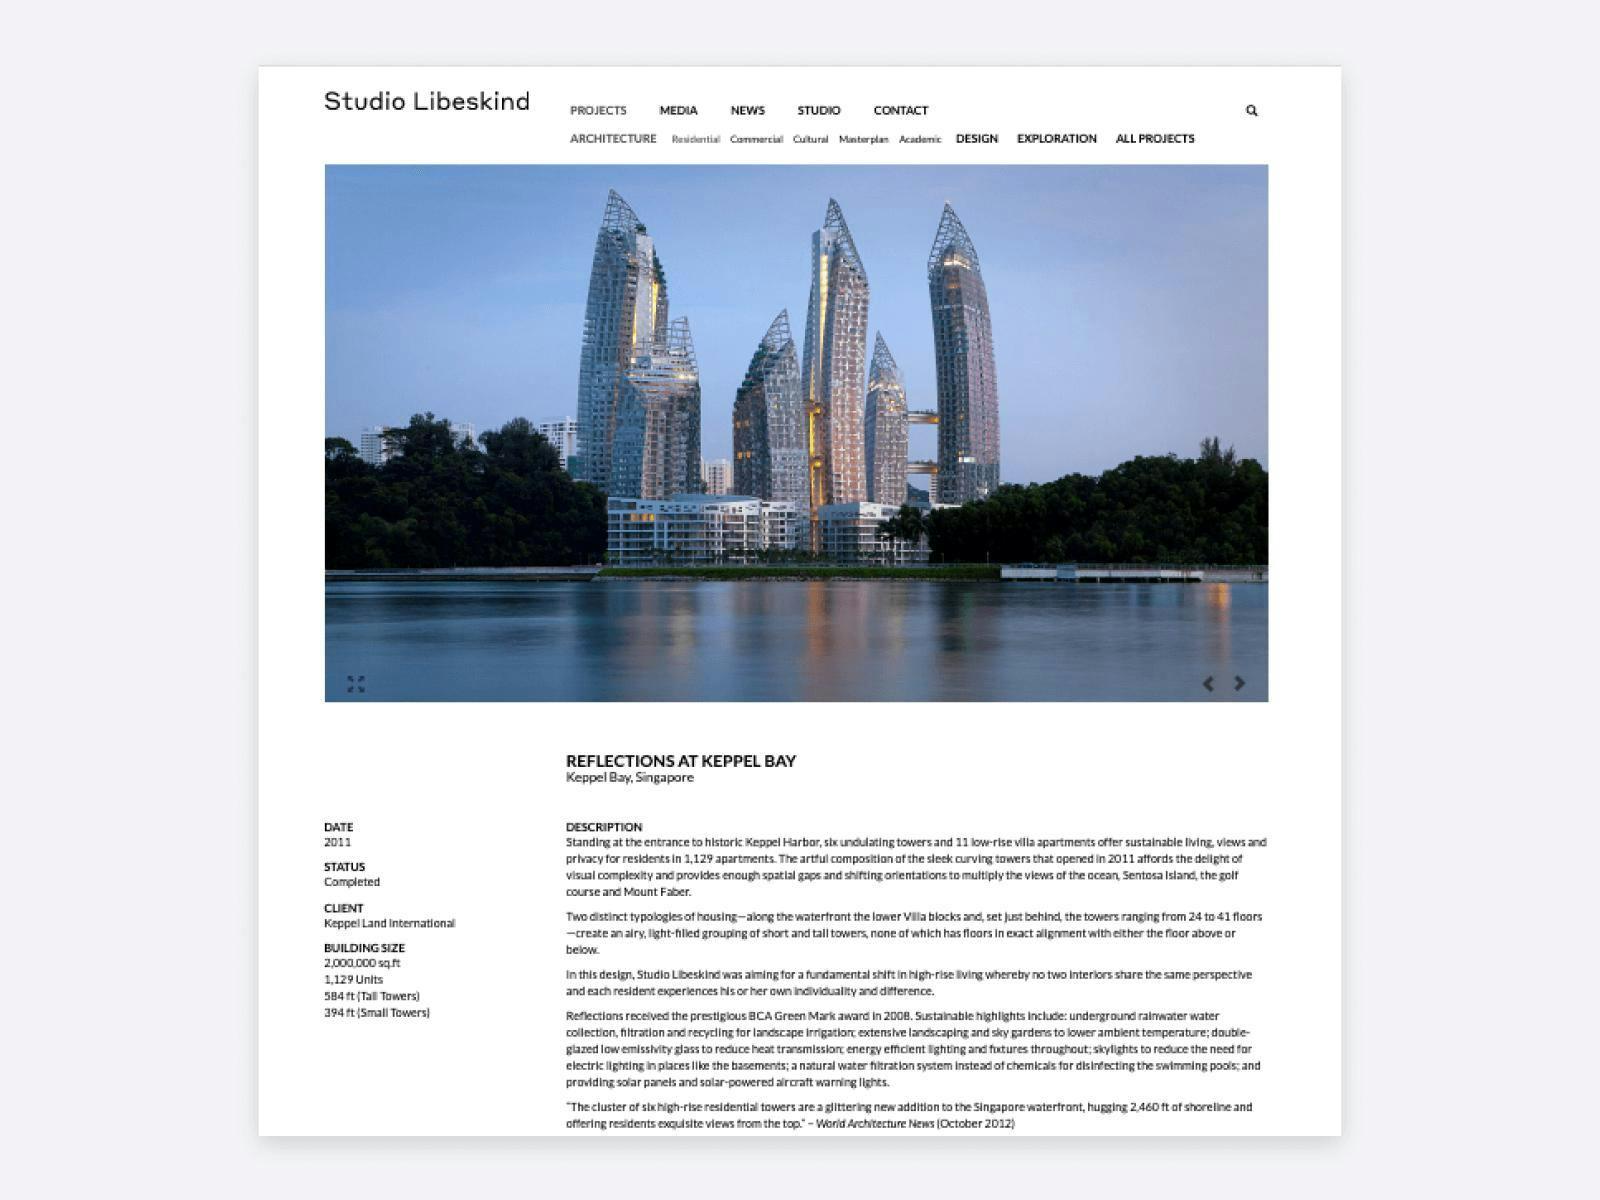 A project page of Studio Libeskind